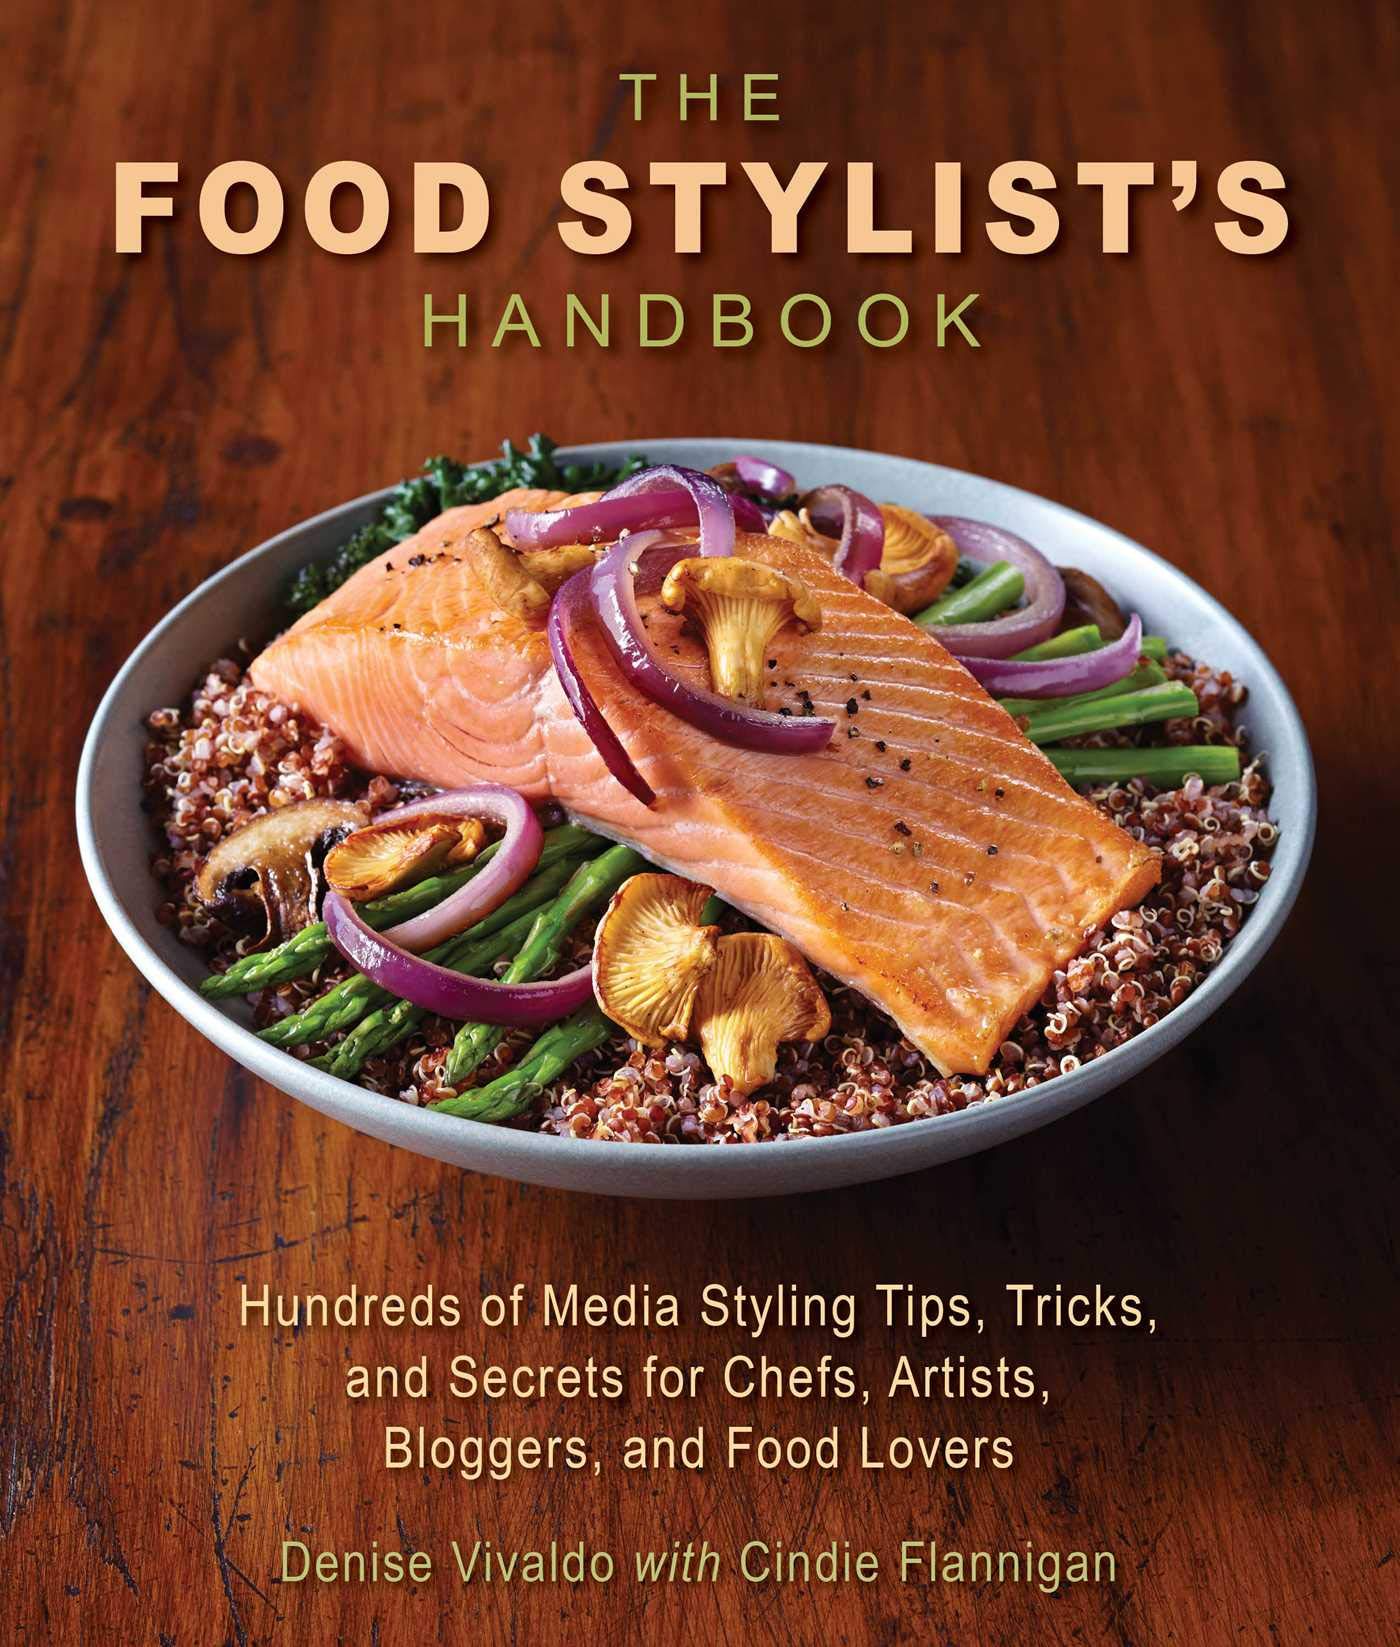 The Food Stylist's Handbook: Hundreds of Media Styling Tips, Tricks, and Secrets for Chefs, Artists, Bloggers, and Food Lovers (Denise Vivaldo, Cindie Flannigan)